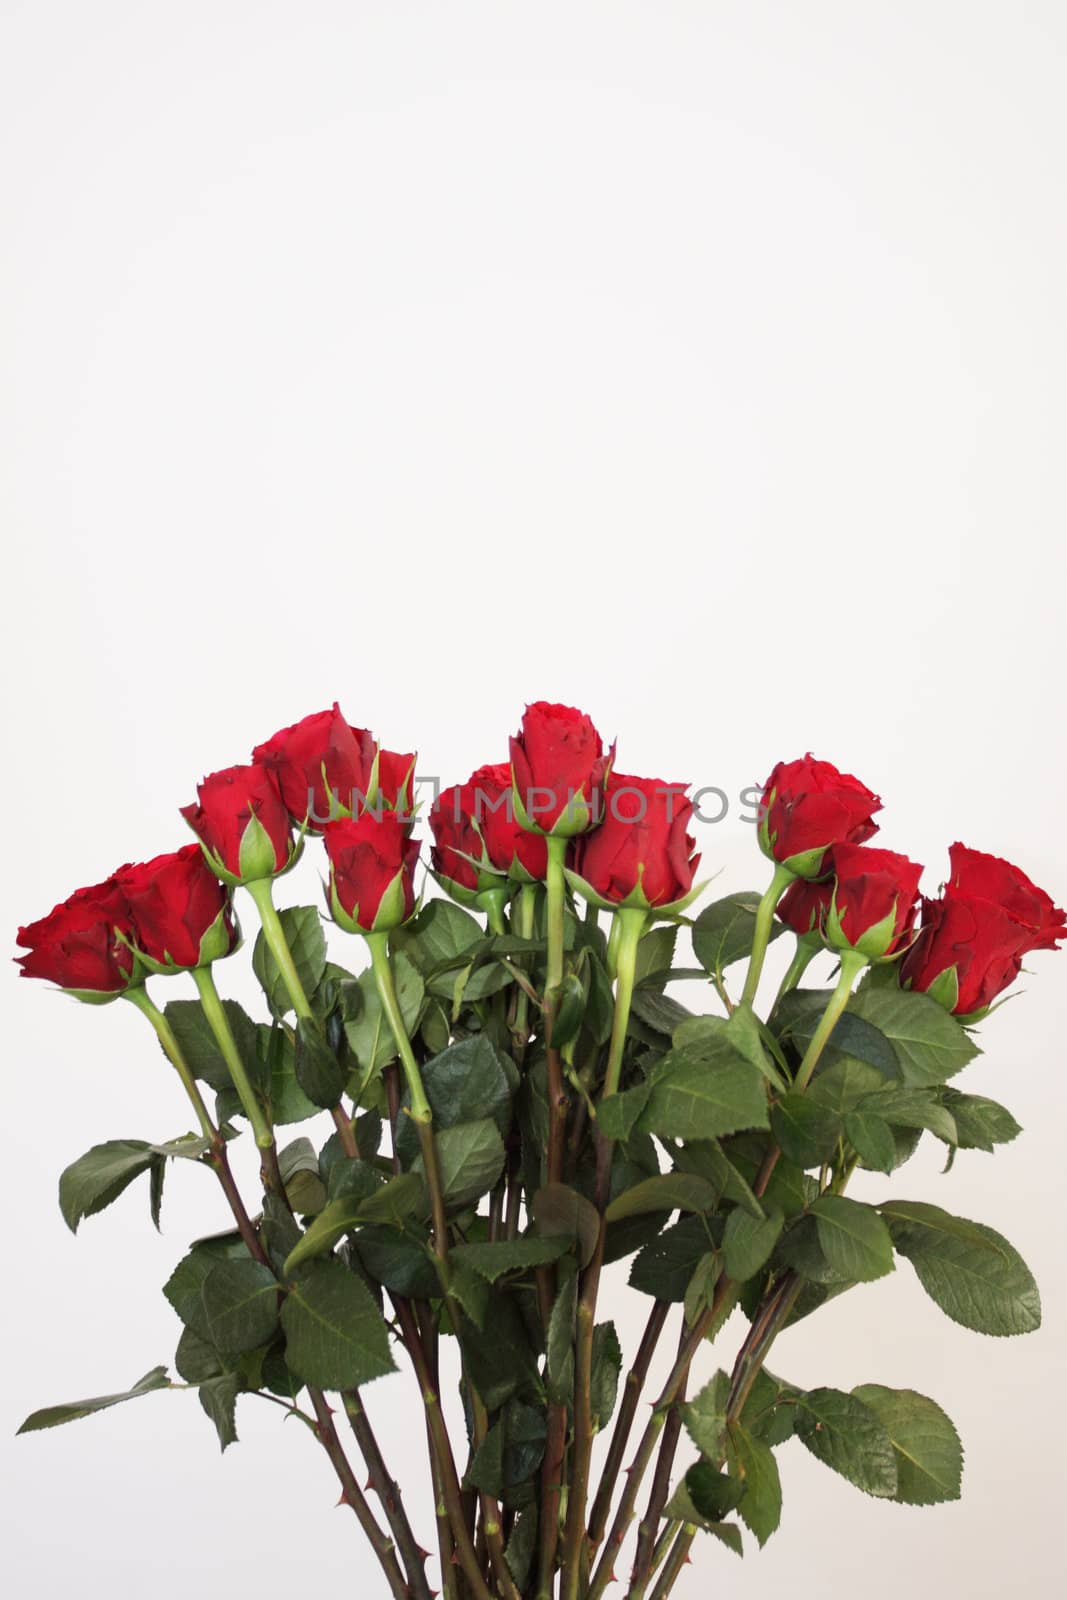 bouquet of red roses in a vase on white background by jp_chretien